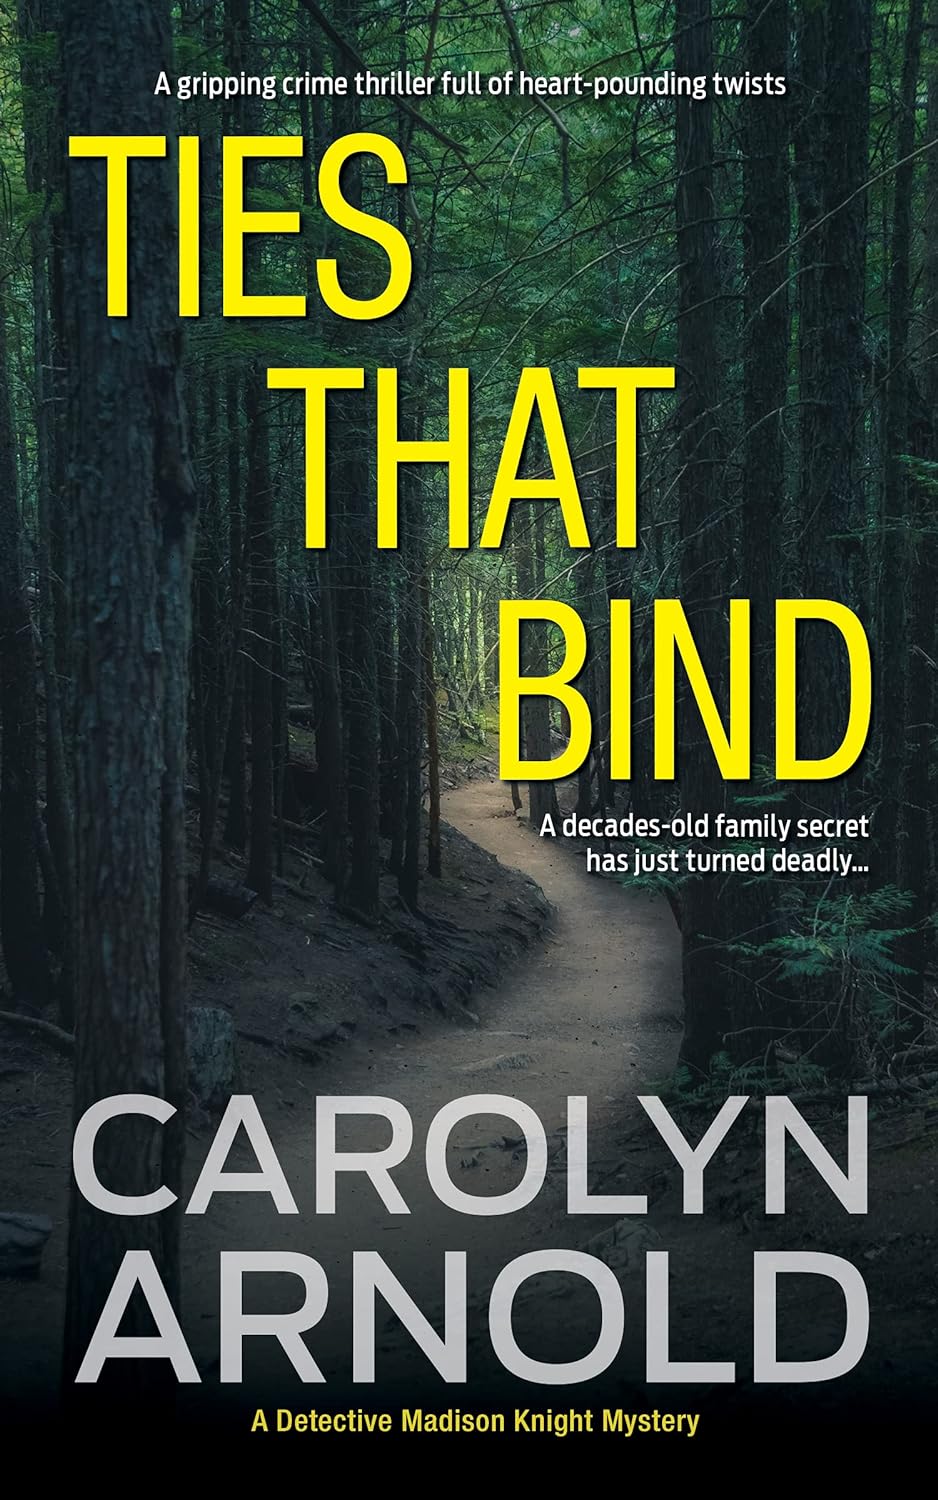 gripping crime thriller full of heart-pounding twists by Bestselling Author Carolyn Arnold